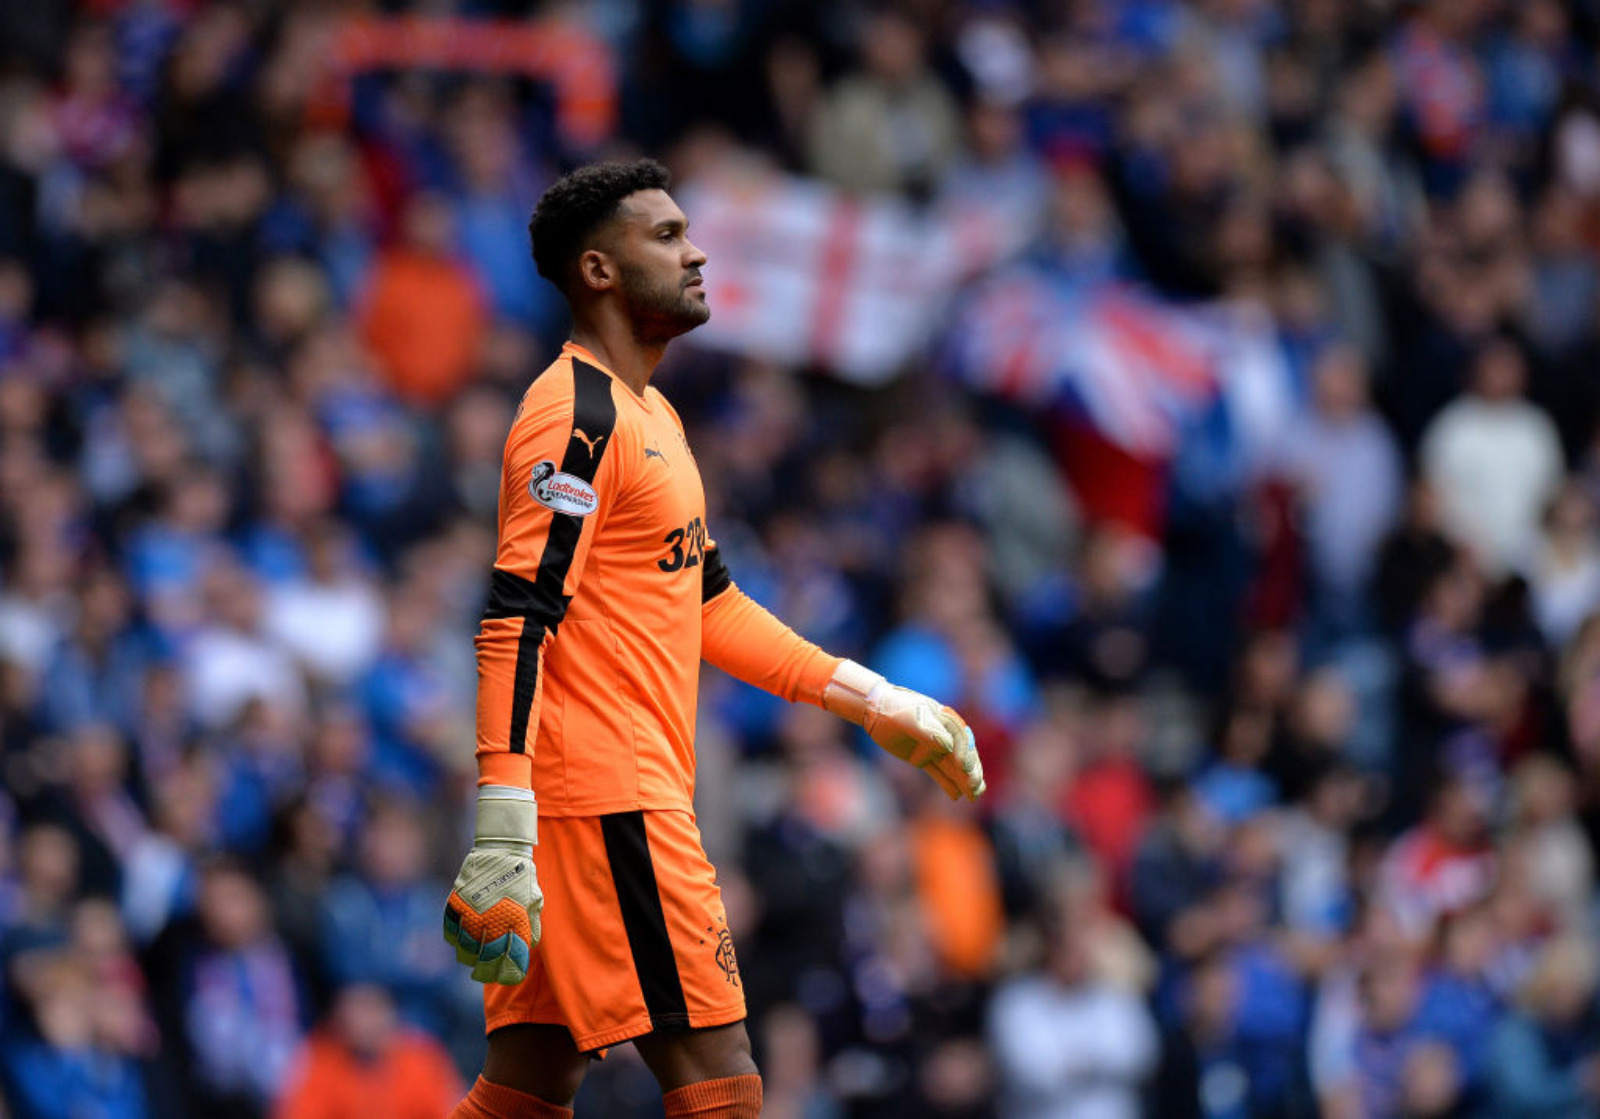 Wes Foderingham Will Soon Sign as Goalkeeper for Sheffield United